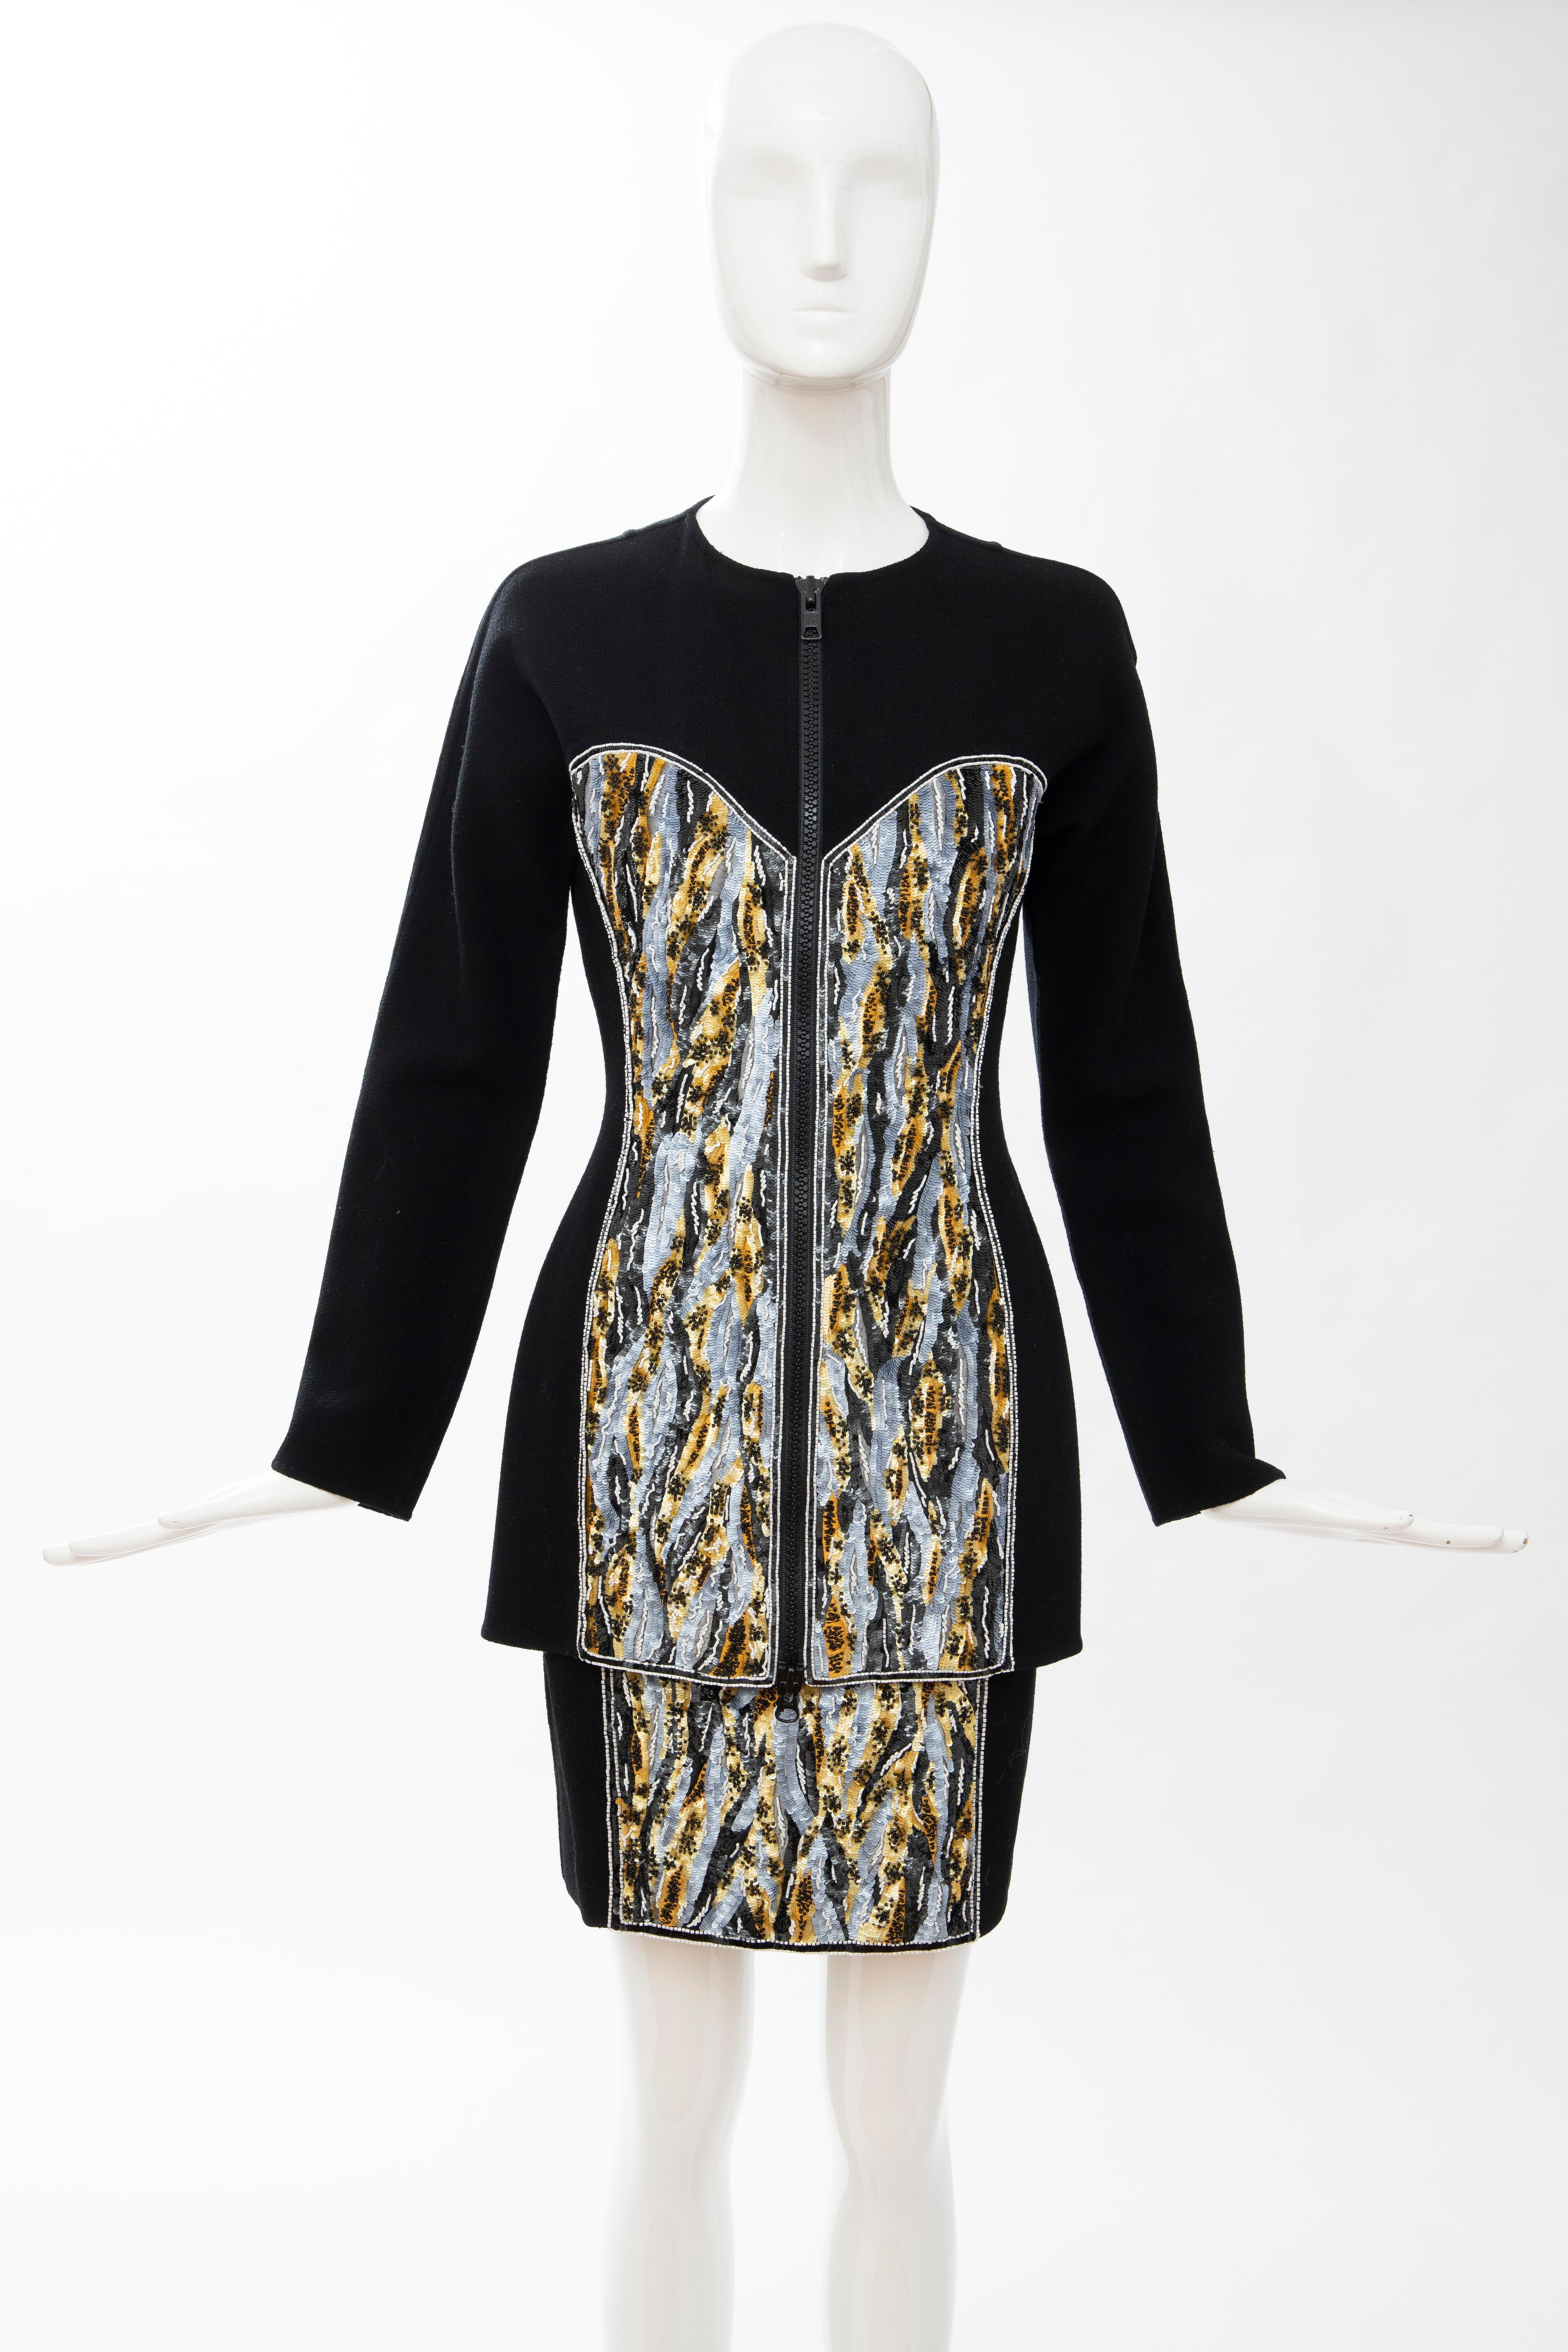 Geoffrey Beene Black Wool Crepe Embroidered Sequins Dress Ensemble, Circa 1990's In Excellent Condition For Sale In Cincinnati, OH